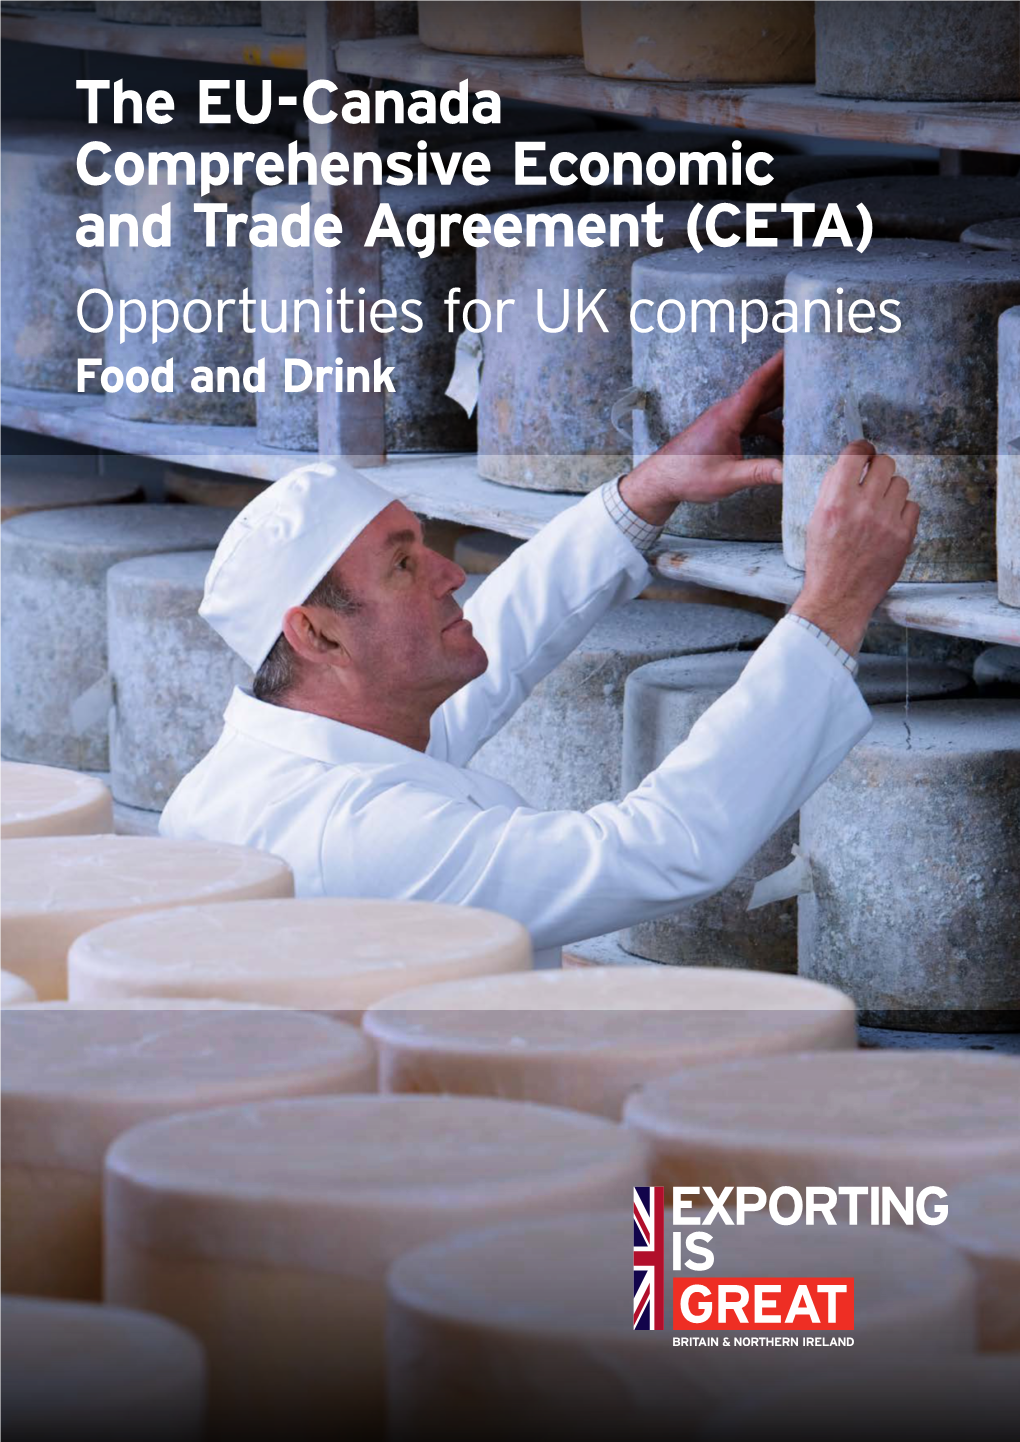 The EU-Canada Comprehensive Economic and Trade Agreement (CETA) Opportunities for UK Companies Food and Drink the EU-Canada Comprehensive Economic and Trade Agreement